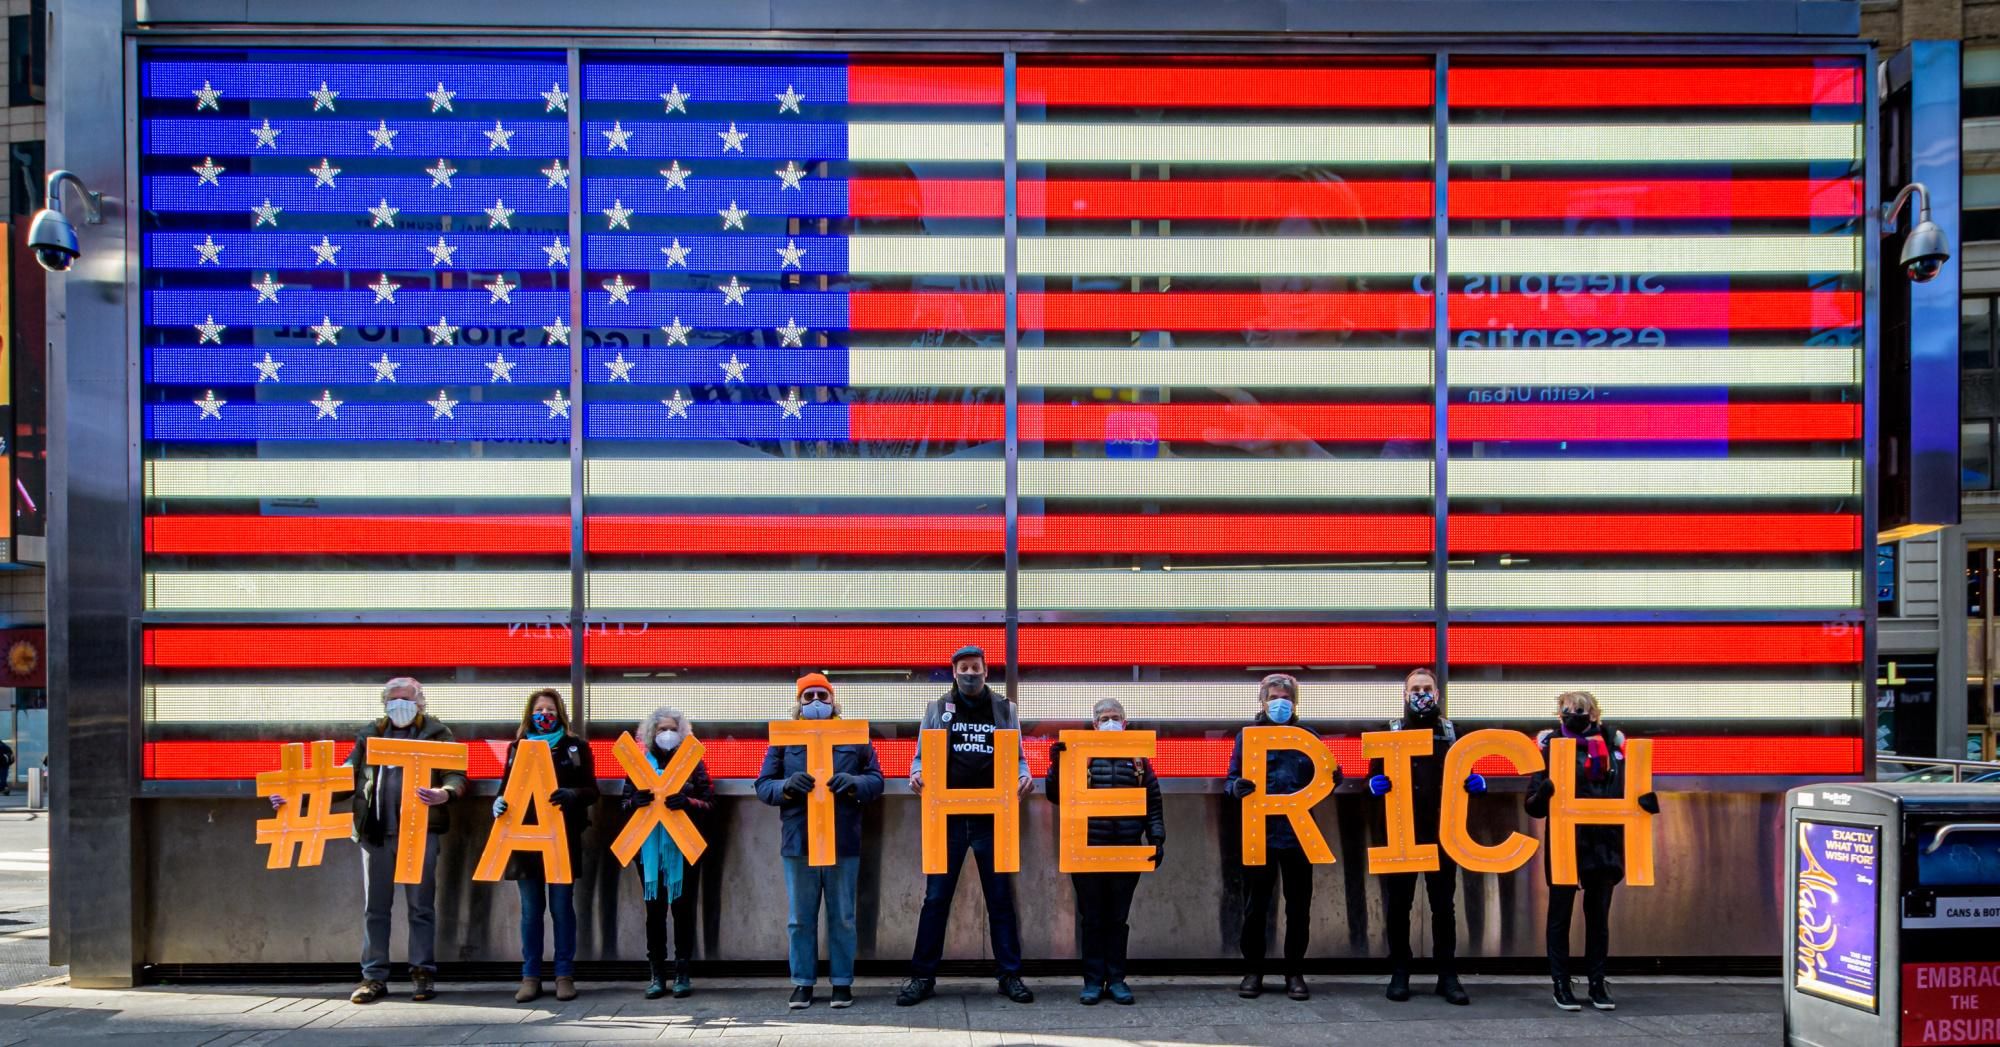 Activists spell out #TaxTheRich in New York City on March 4, 2021. (Photo: Erik McGregor/LightRocket via Getty Images)